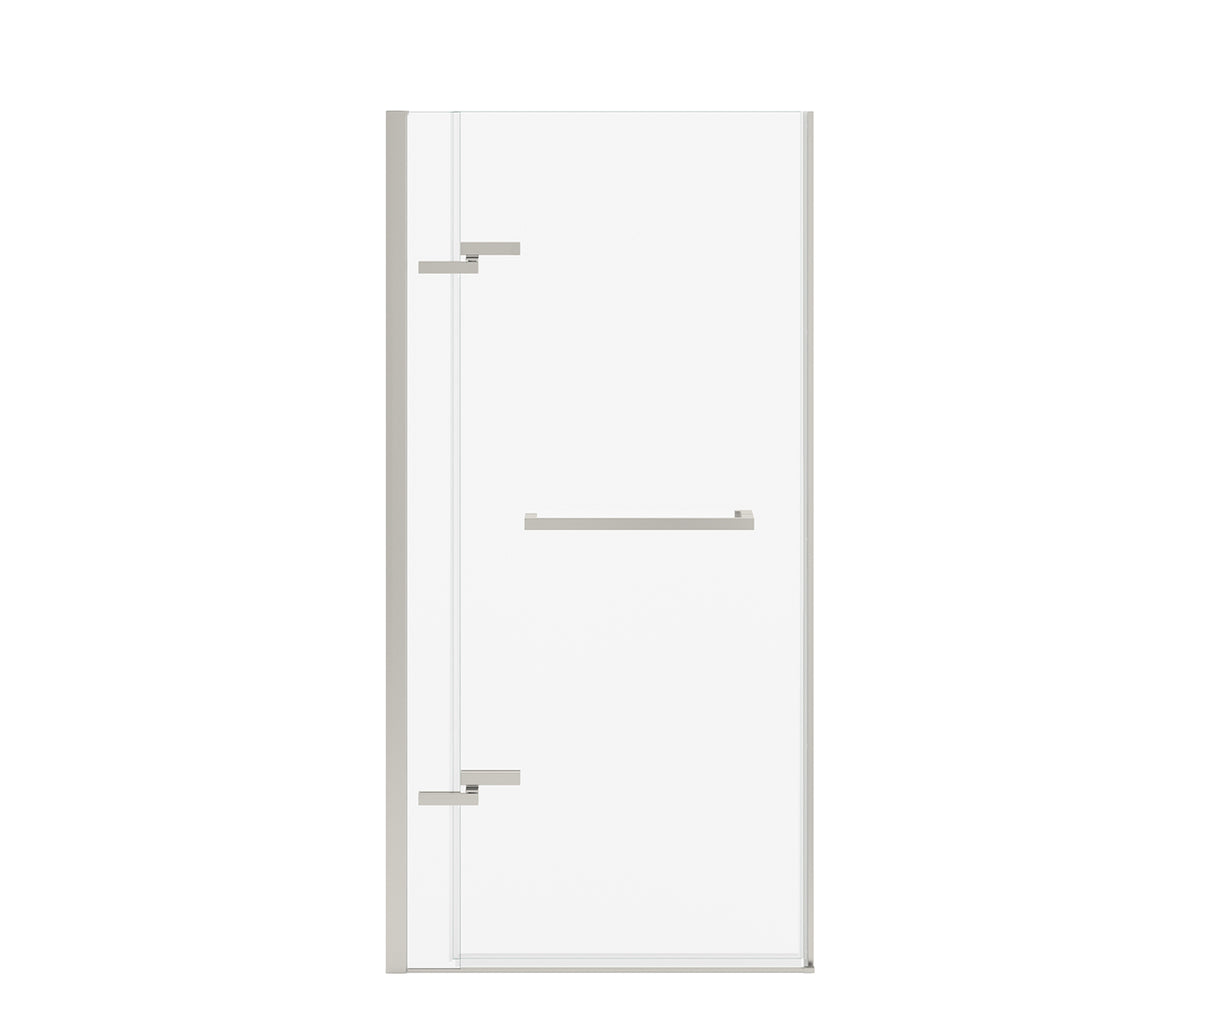 MAAX 139576-900-305-000 Reveal Sleek 71 38-41 x 71 ½ in. 8mm Pivot Shower Door for Alcove Installation with Clear glass in Brushed Nickel